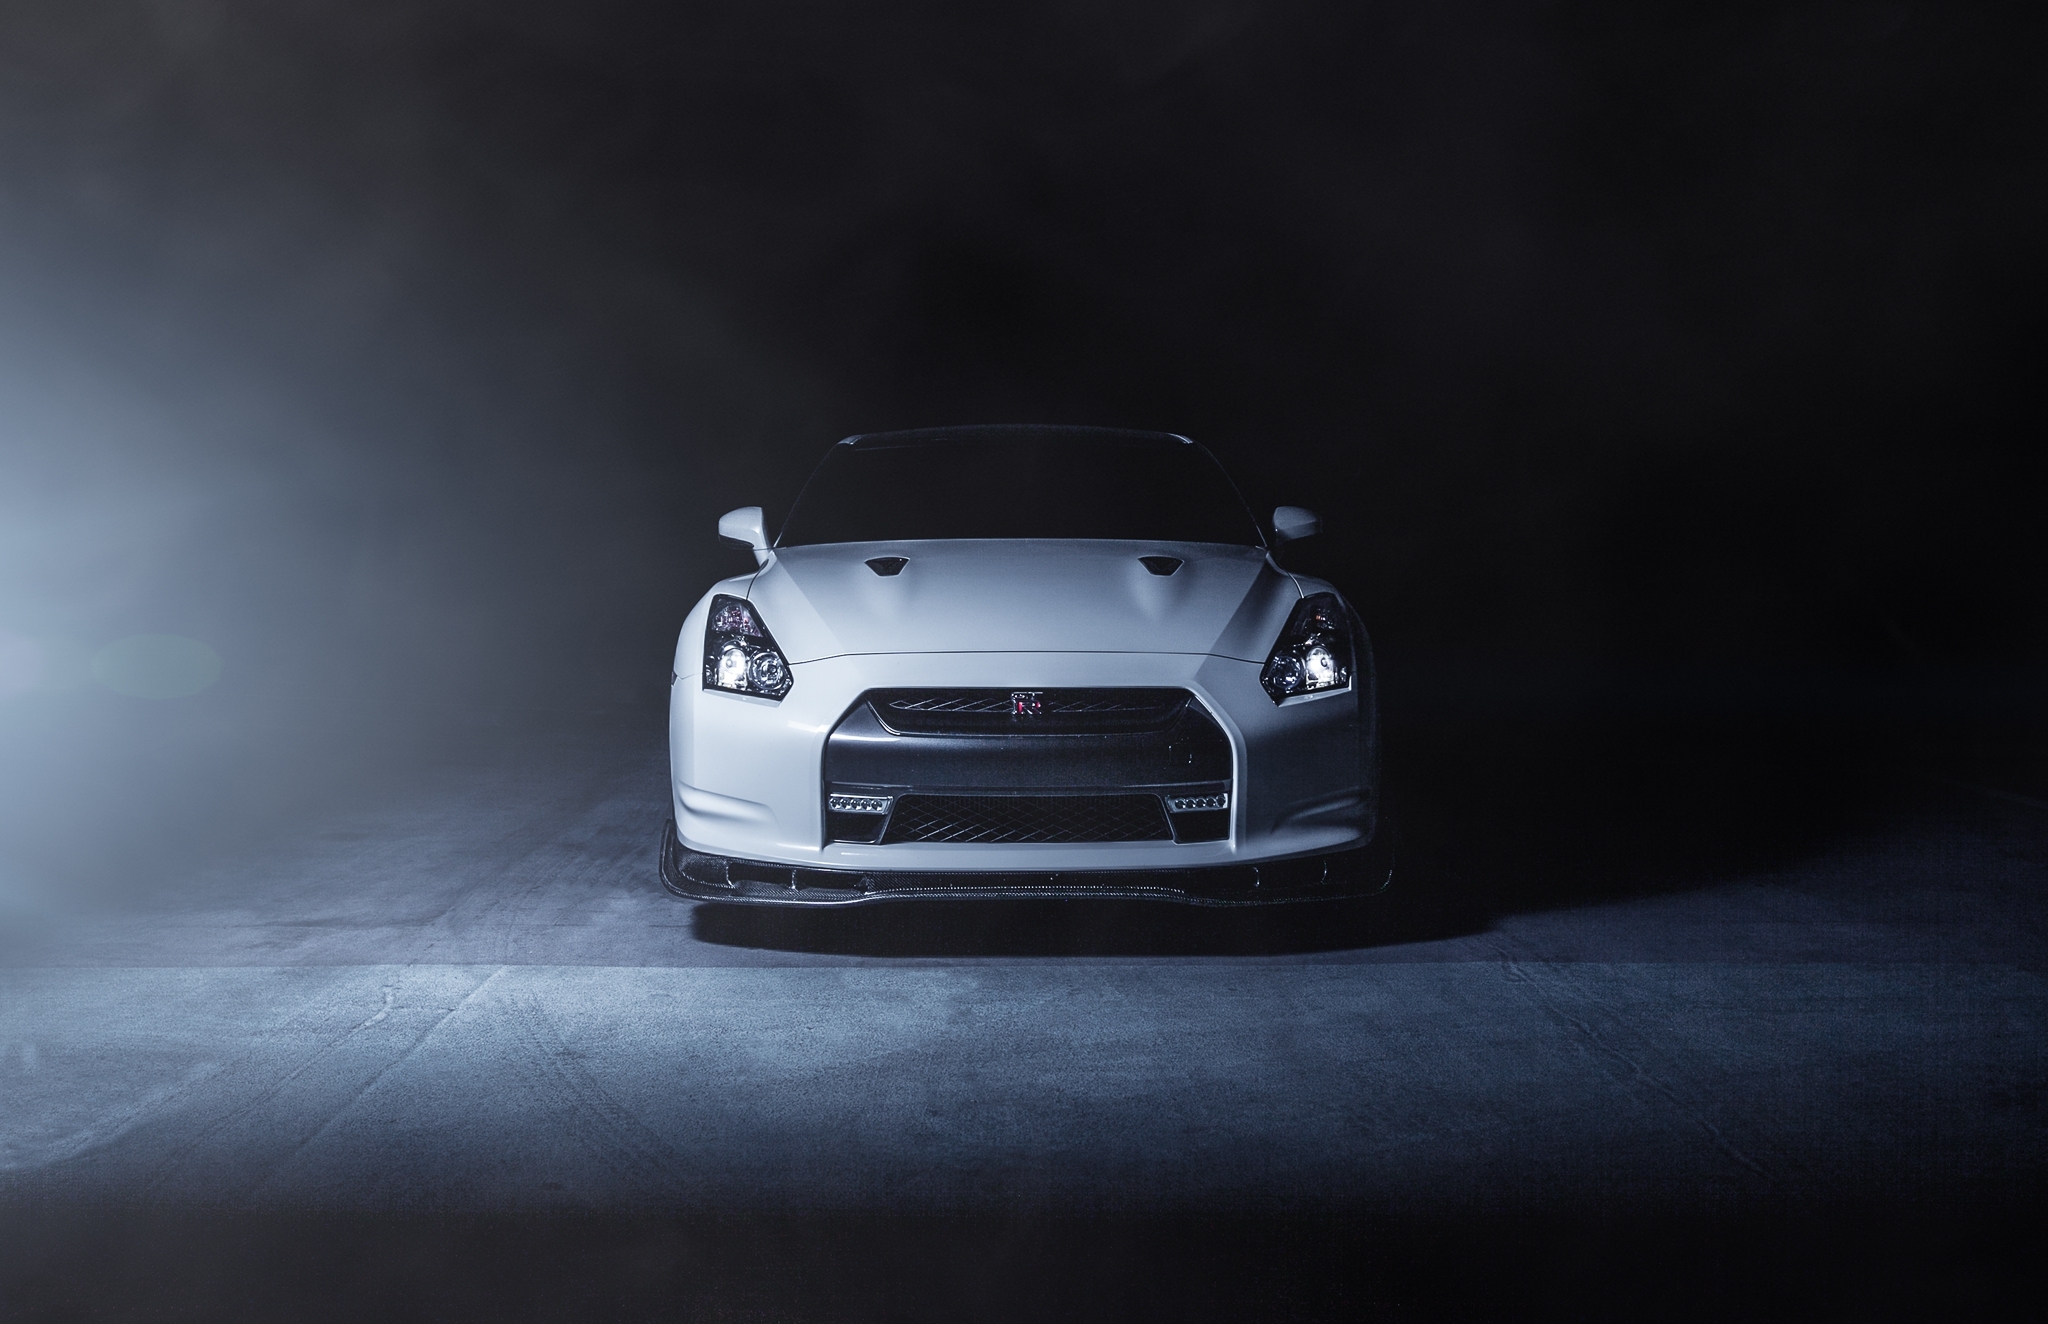 102157 free download White wallpapers for phone, gt-r, nissan, smoke, cars White images and screensavers for mobile